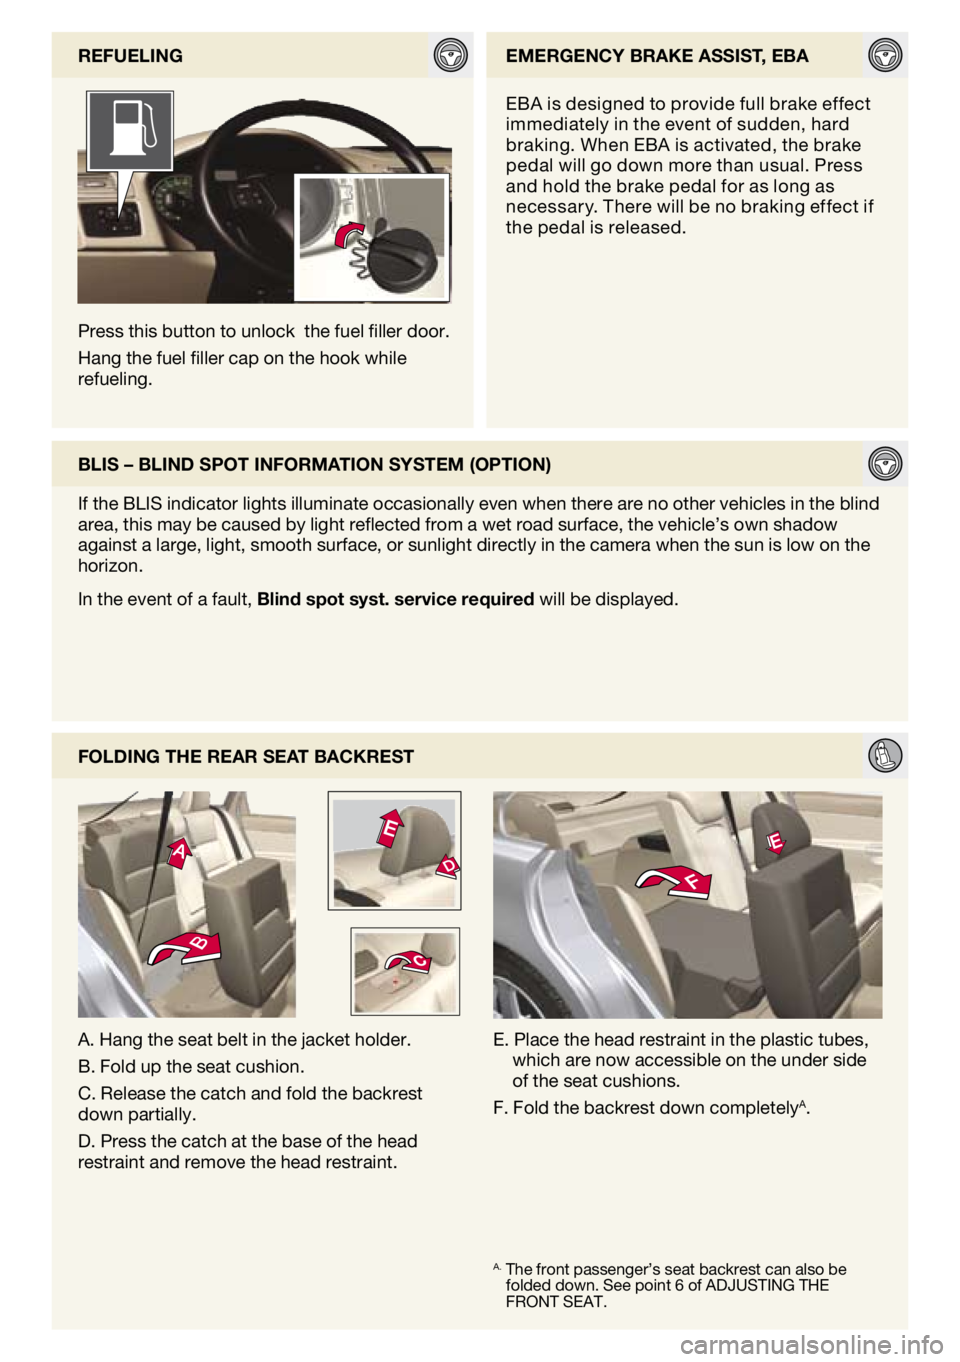 VOLVO V50 2009  Quick Guide 
FOldIng The ReAR SeAT bAckReST
A. Hang the seat belt in the jacket holder.
B. Fold up the seat cushion.
C. Release the catch and fold the backrest down partially.
D. Press the catch at the base of th